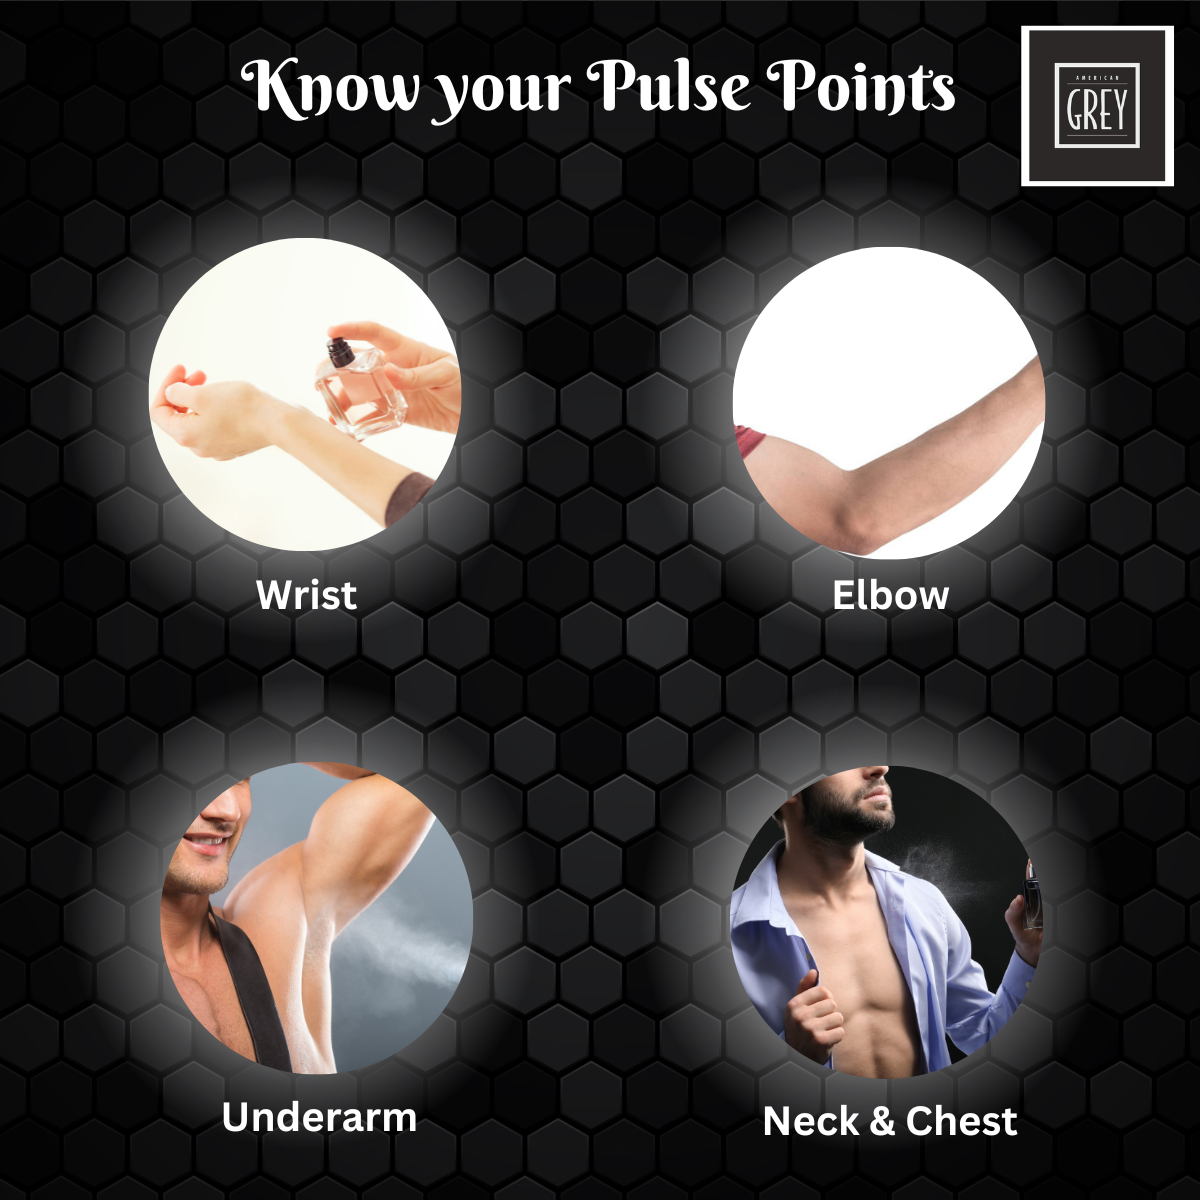 know your pulse points, pulse points, american grey signature legend deo, deo spray for men, , deo spray for him, what are the pulse points to apply deodorant for men, men deodorant, deodorant spray for men, what are the pulse points for perfume male?, what is the best way to apply perfume for men?, where are male pulse points, deodorant tips for men, deodorant tips for male in india, perfume pulse points myths, best pulse points for perfume male, top rated mens deo, men grooming essential, men fragrance for winter season, best deo for cold weather, popular winter deodorant for men, best smelling deo for winter season, best day wear fragrance for men